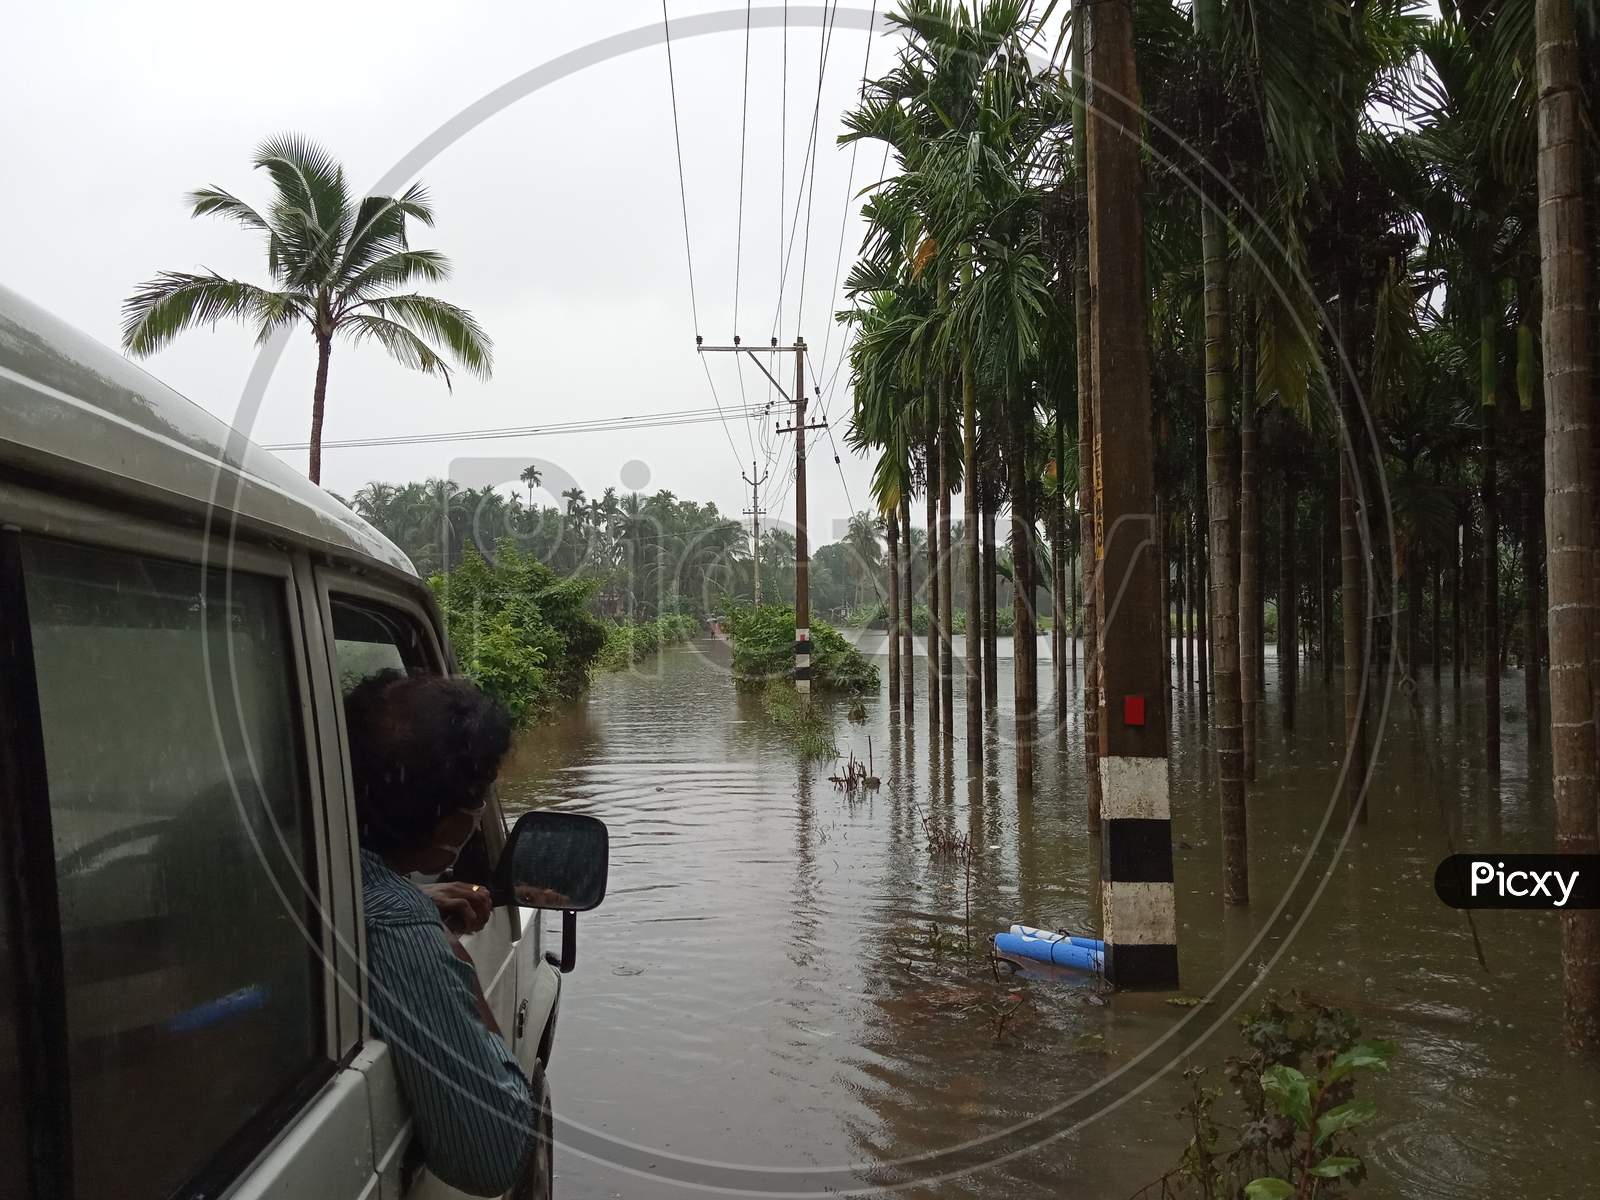 Vehicle stopped due to flood in Kerala